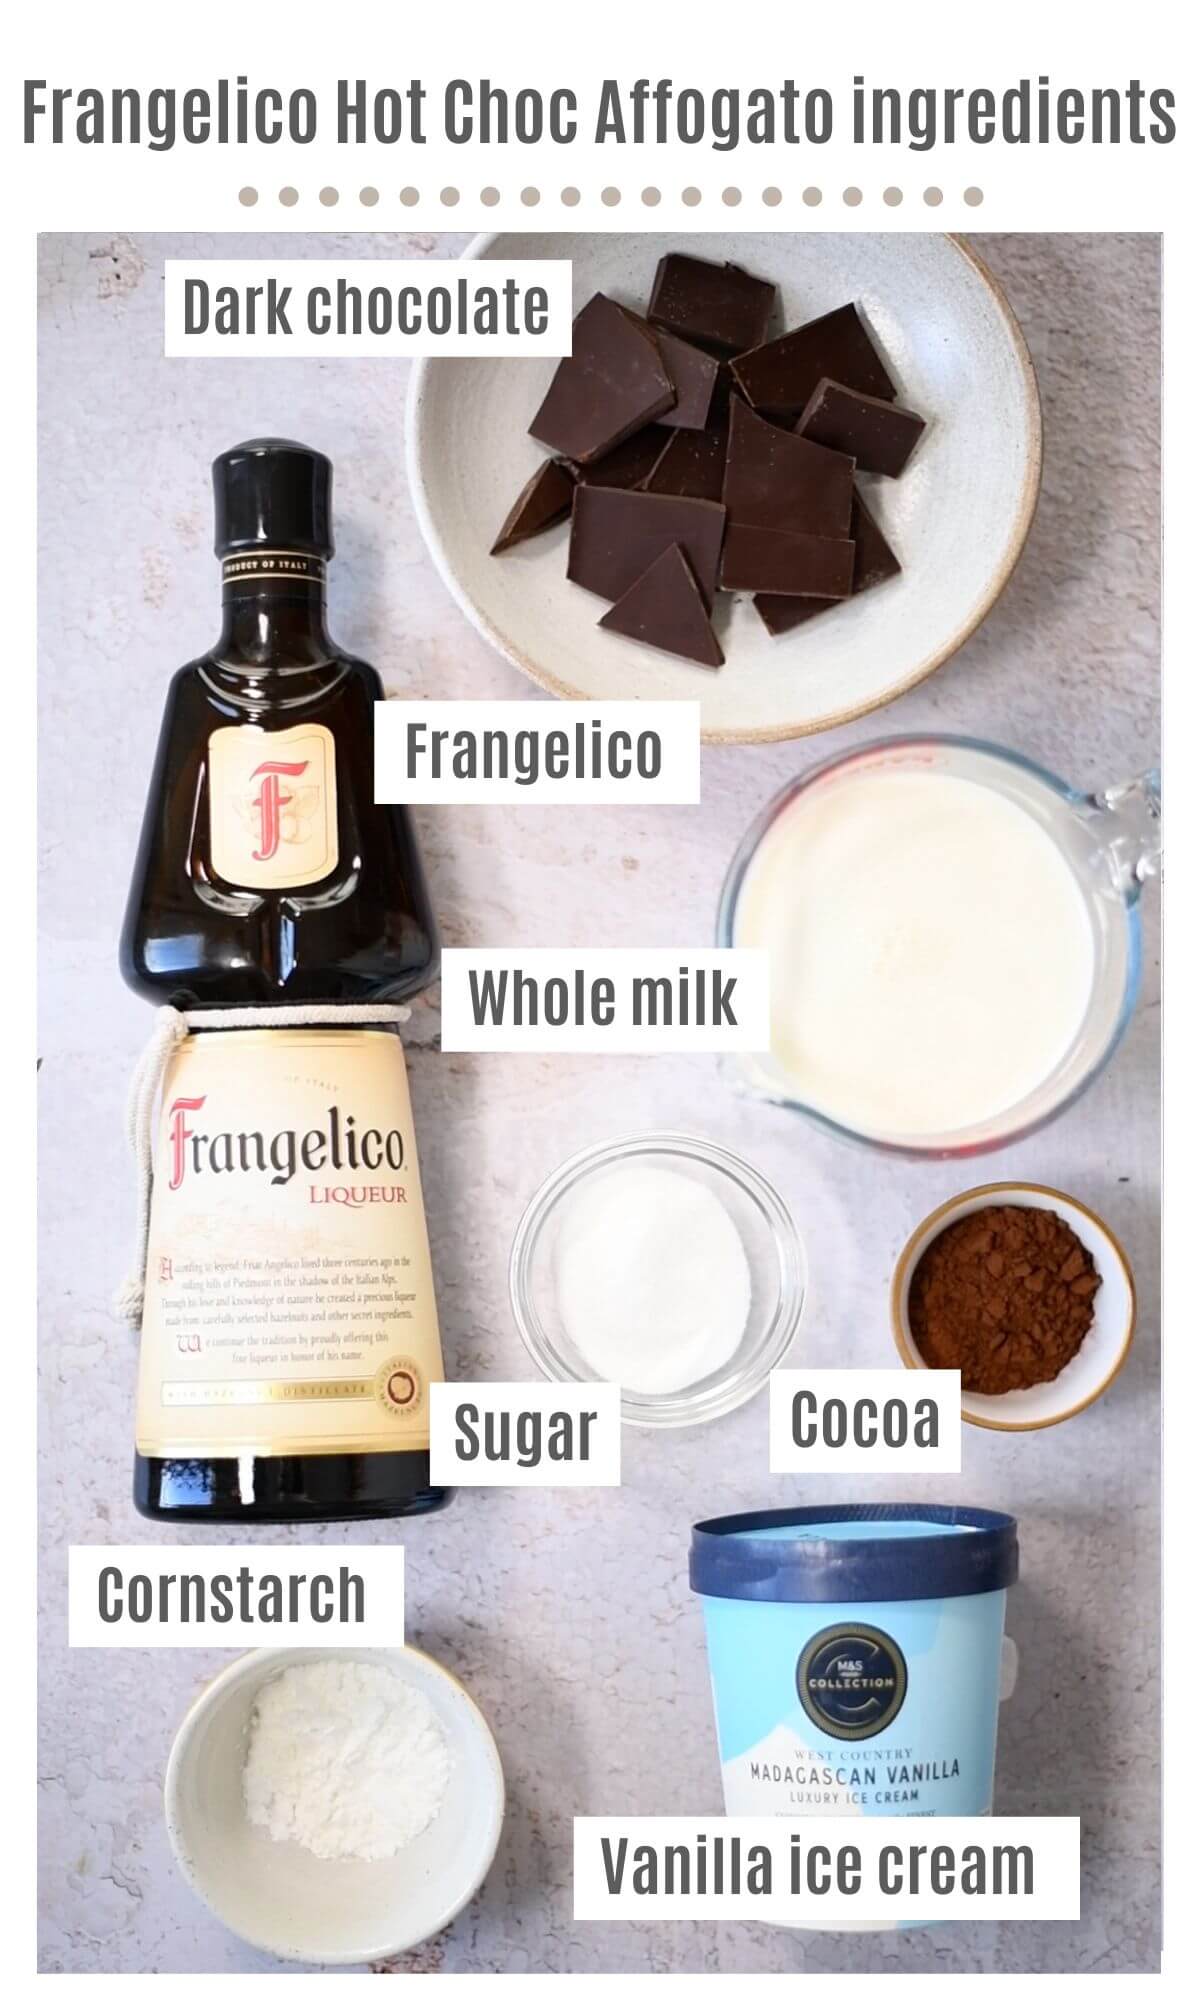 An overhead shot of all the ingredients you need to make a hot chocolate affogato with Frangelico.